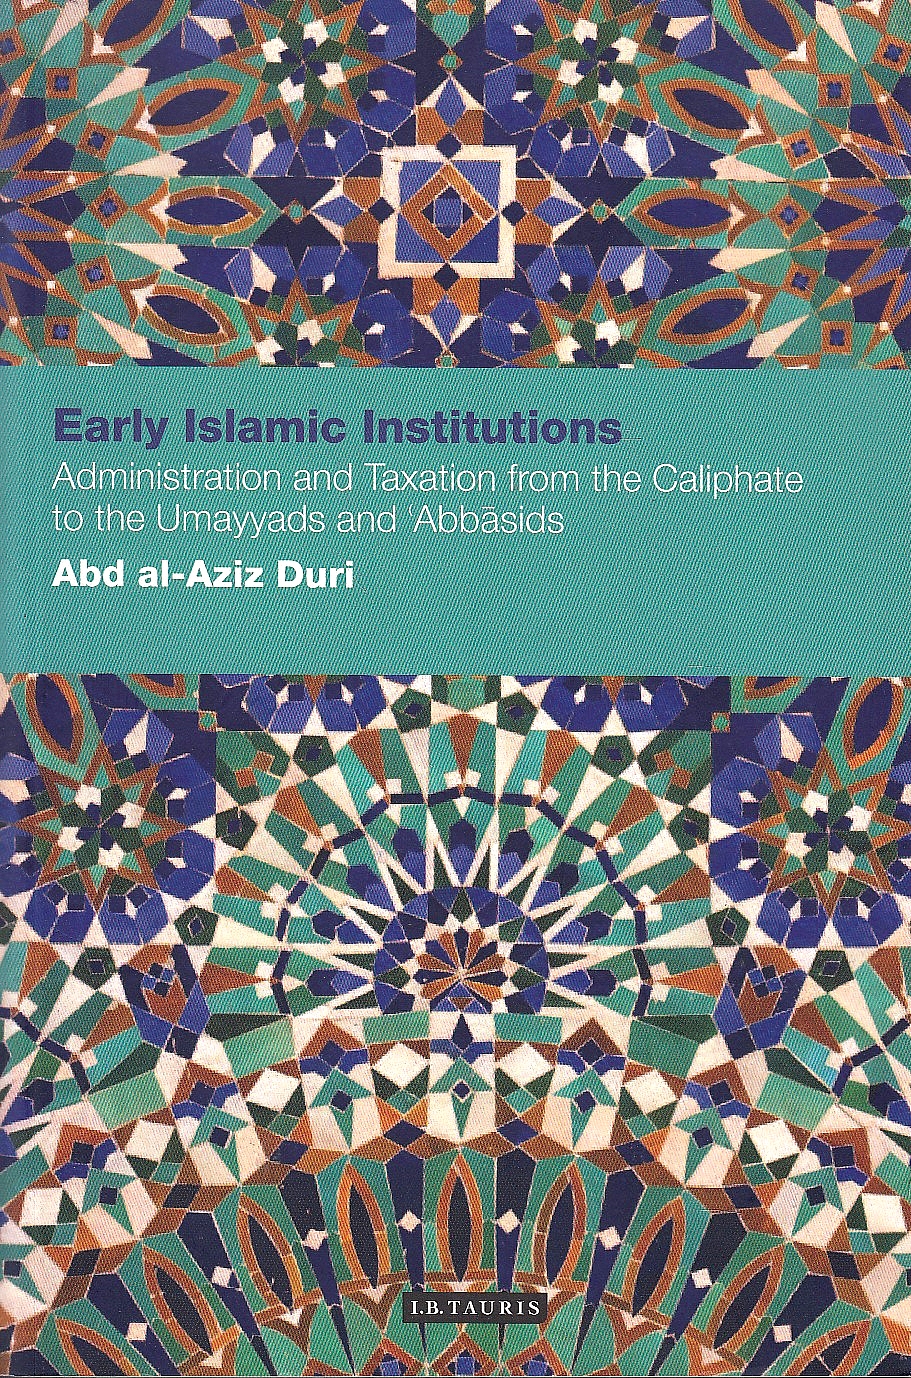 Early Islamic Institutions: administration and taxation from the Caliphate to the Umayyads and Abbasids.